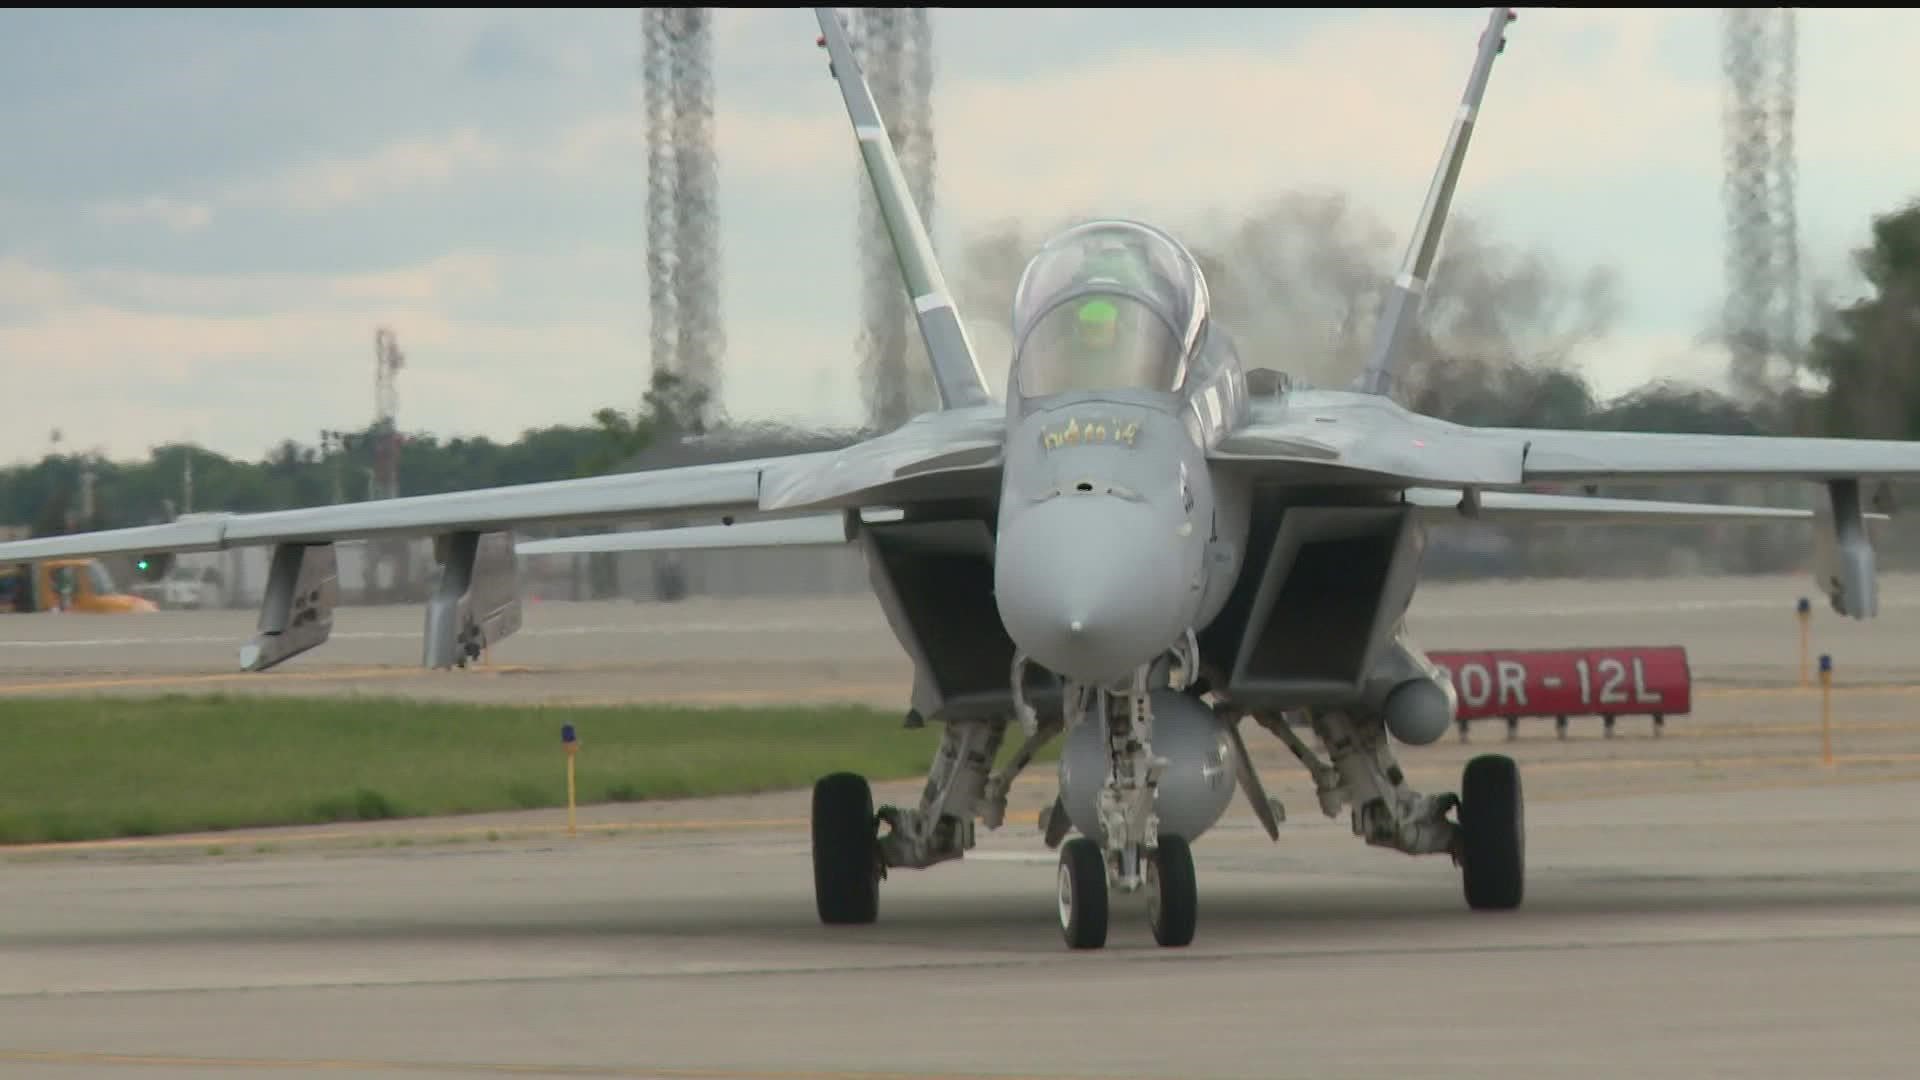 The Minnesota Council of the United States Navy League is hosting a unique chance to see the Navy's F/A-18F Super Hornet and other aircraft.